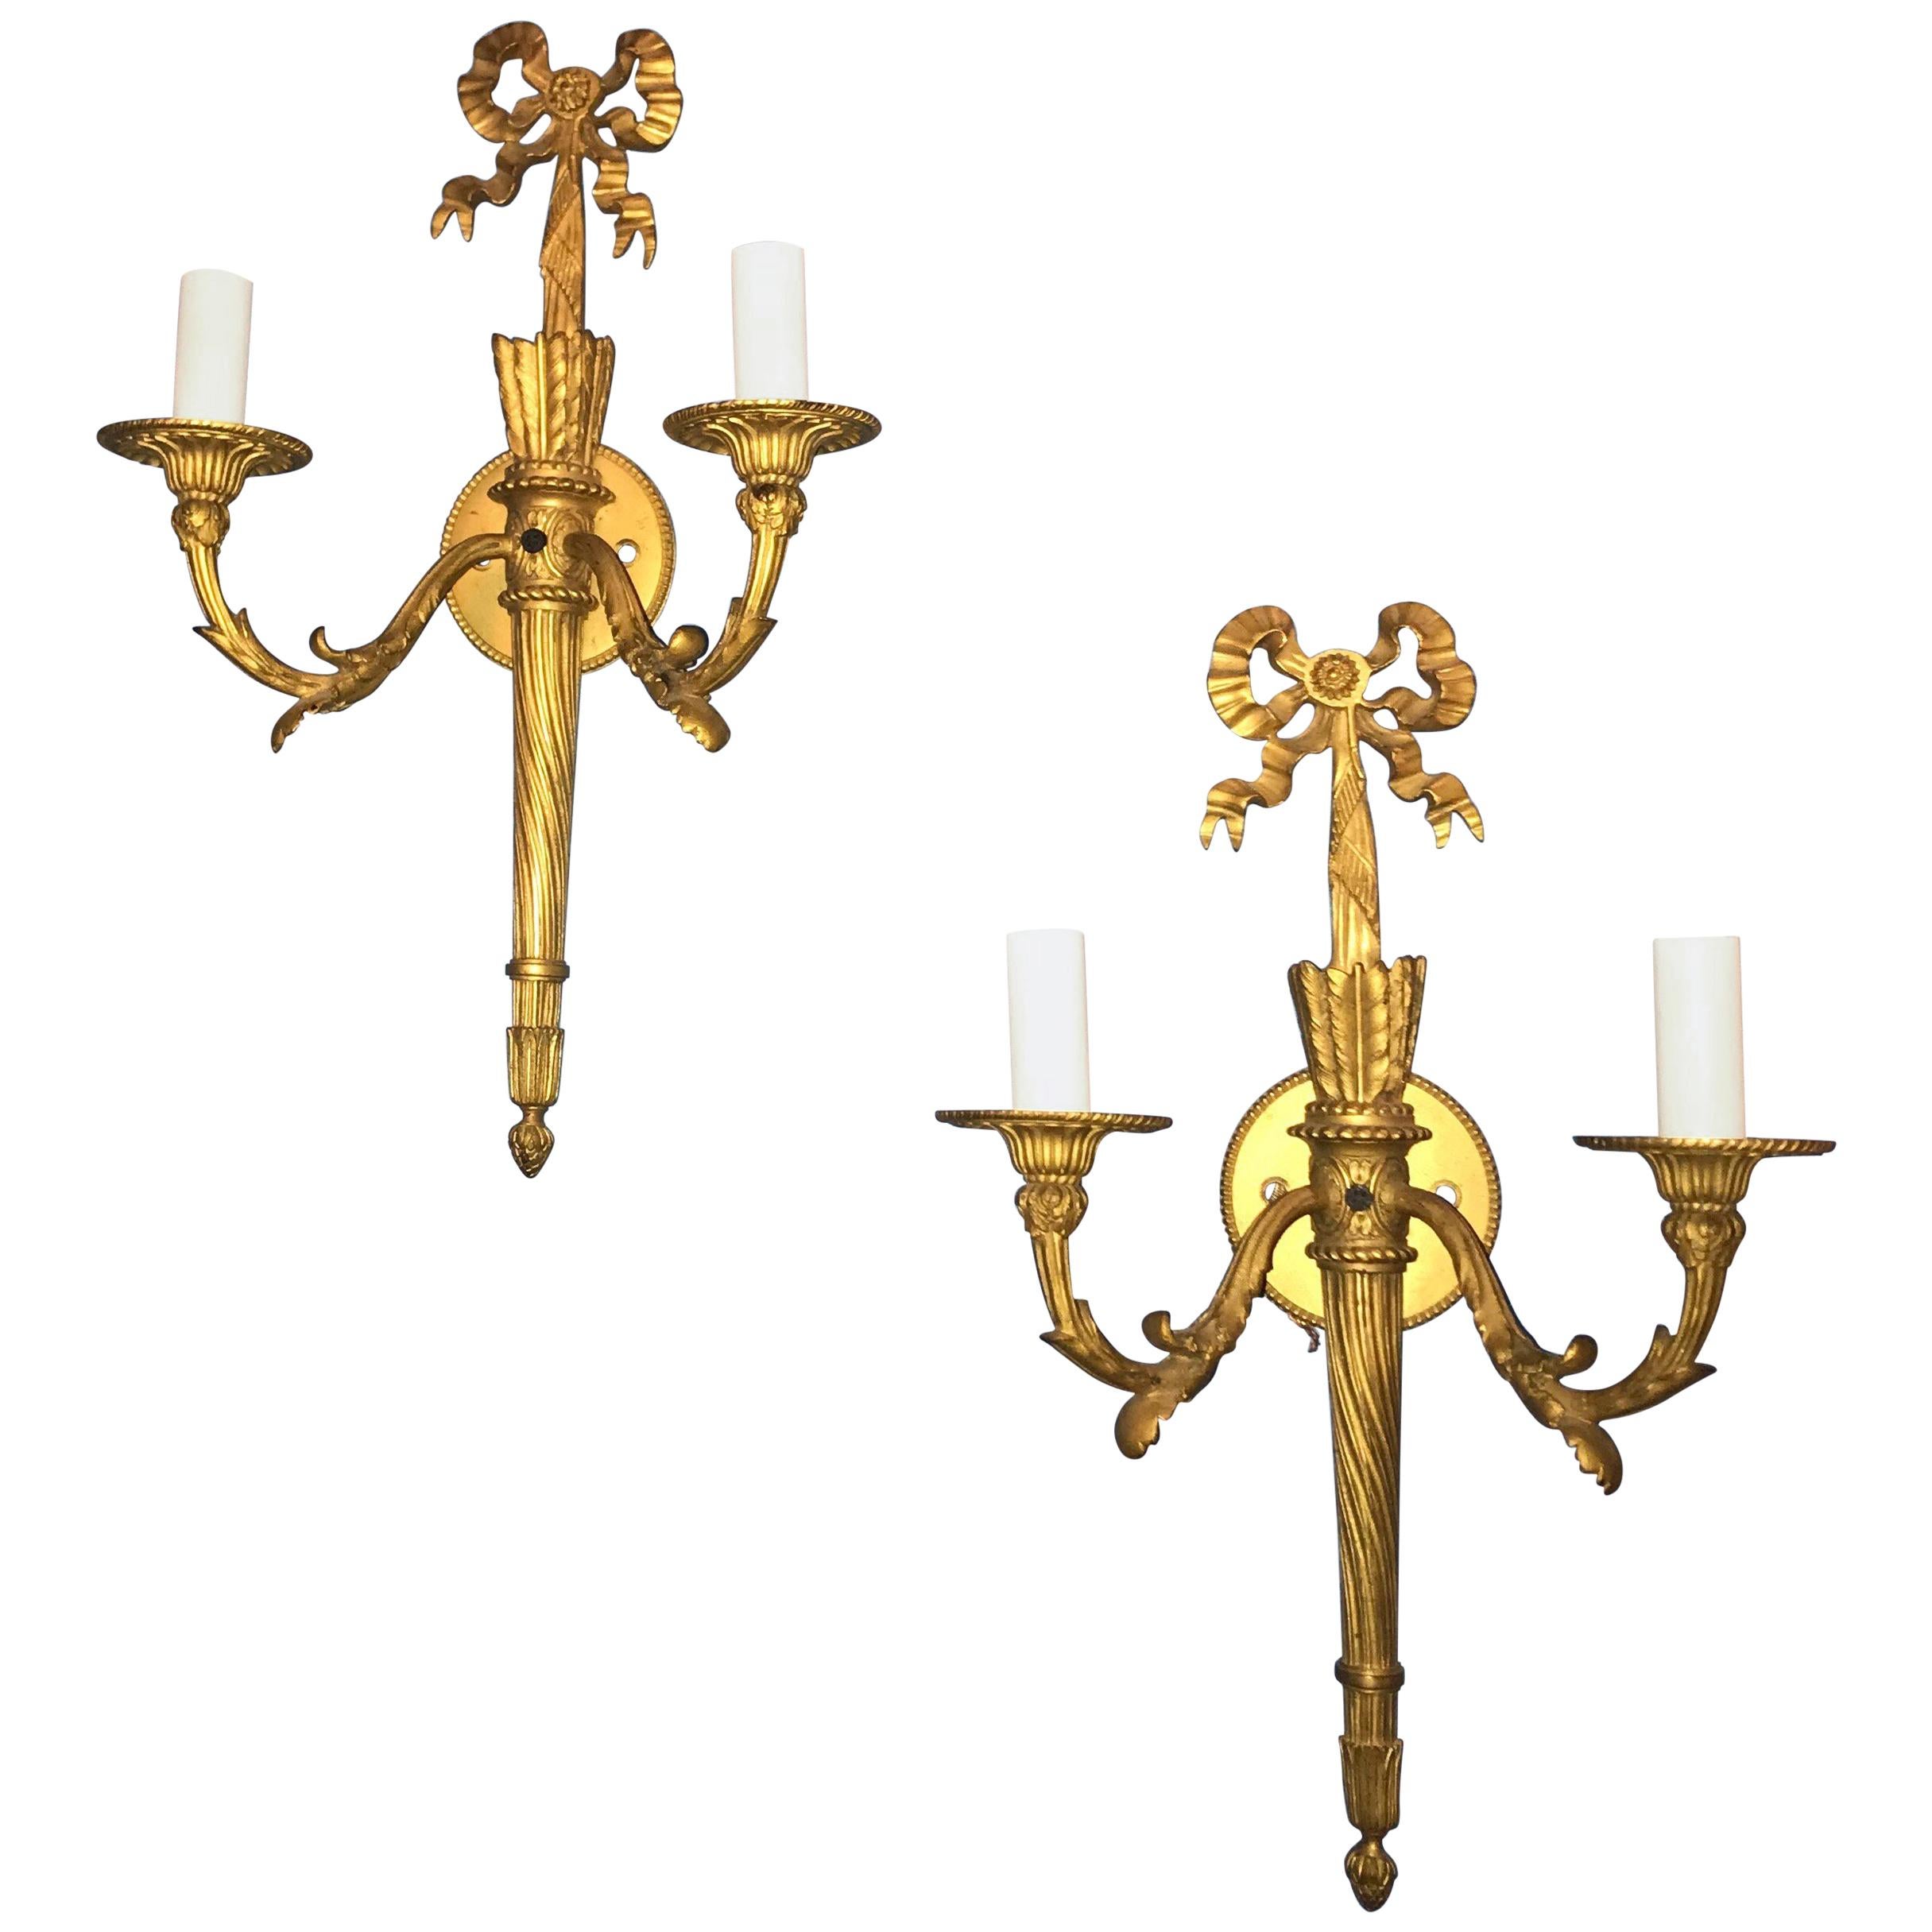 Wonderful Pair of French Doré Bronze Bow Top Flame Two-Light Filigree Sconces